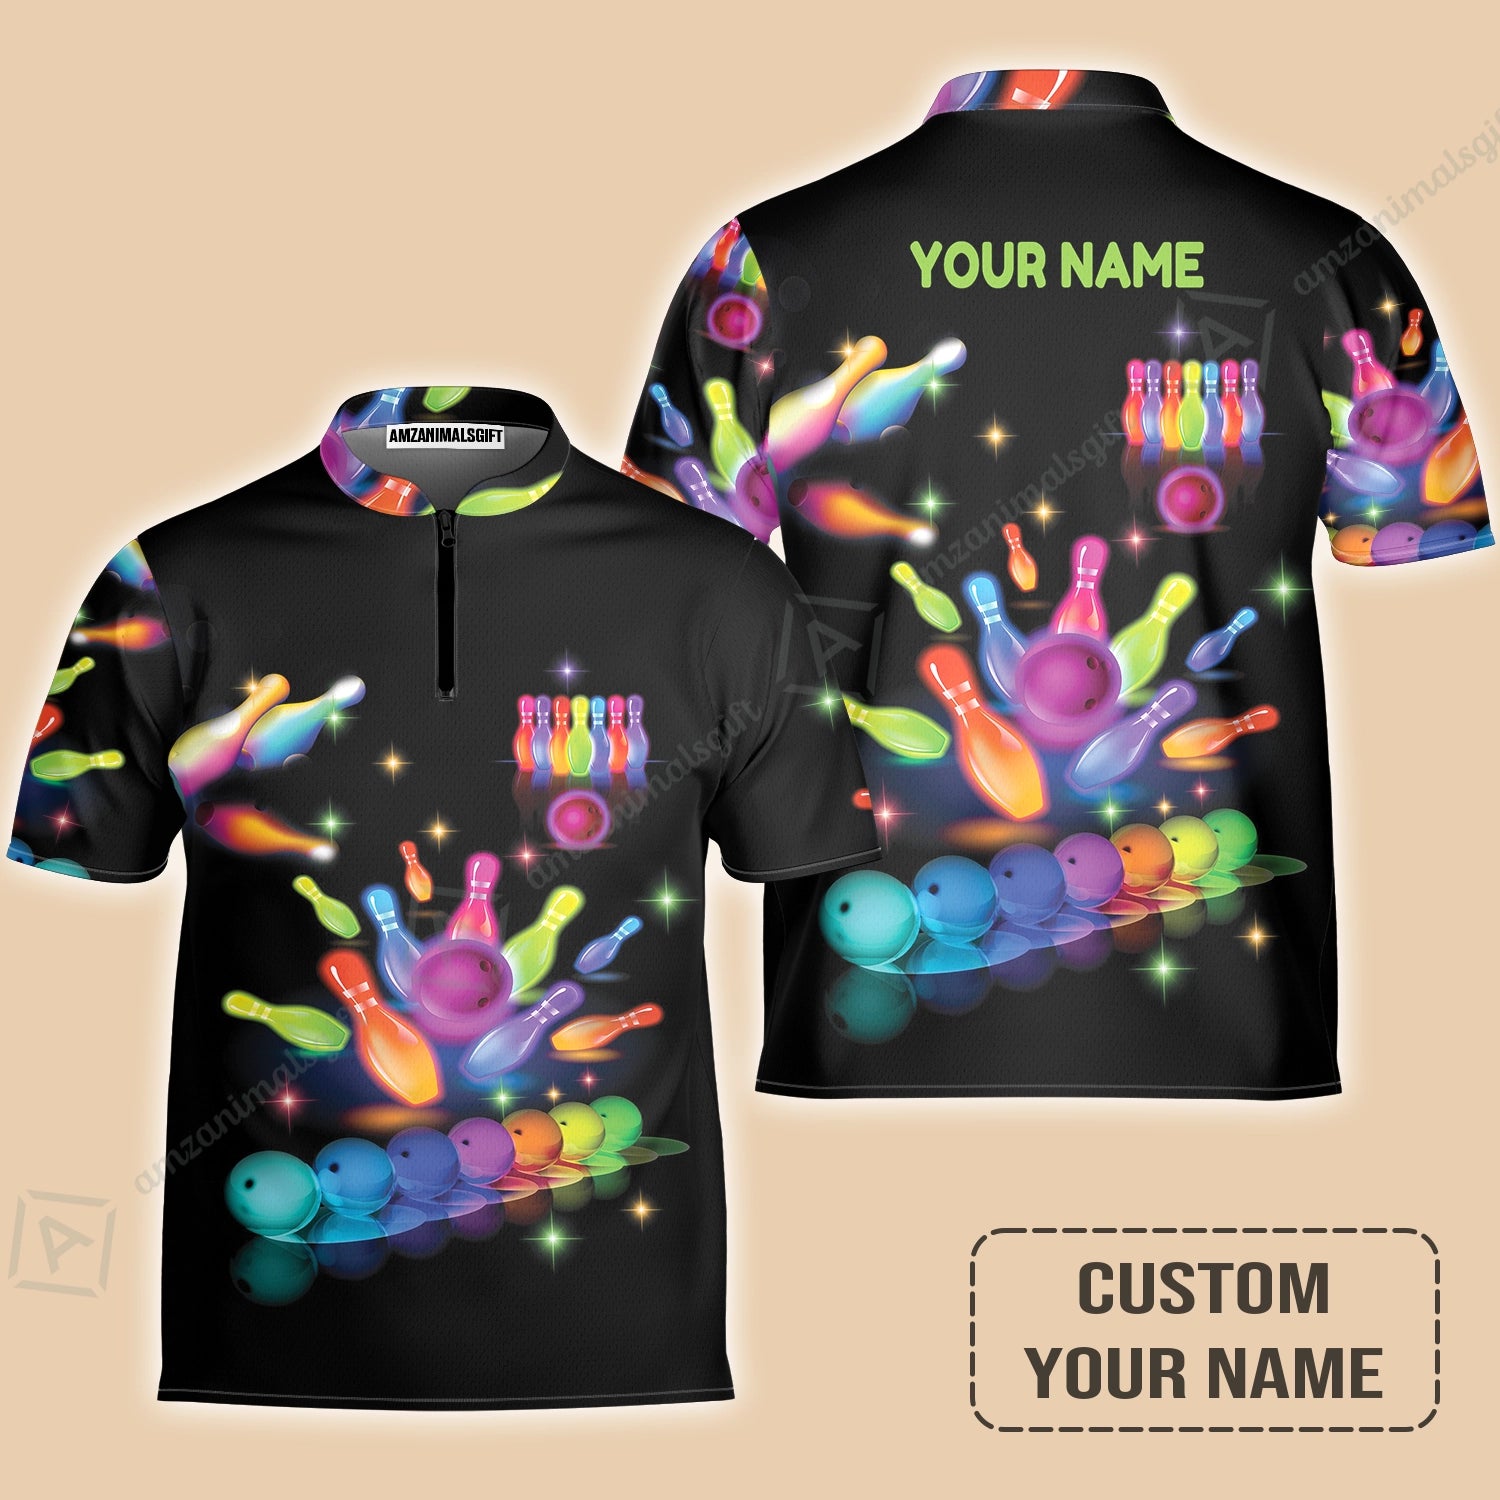 Bowling Jersey With Custom Name, Colorful Bowling Pattern Jersey For Men And Women, Perfect Outfits For Bowling Lovers, Bowlers